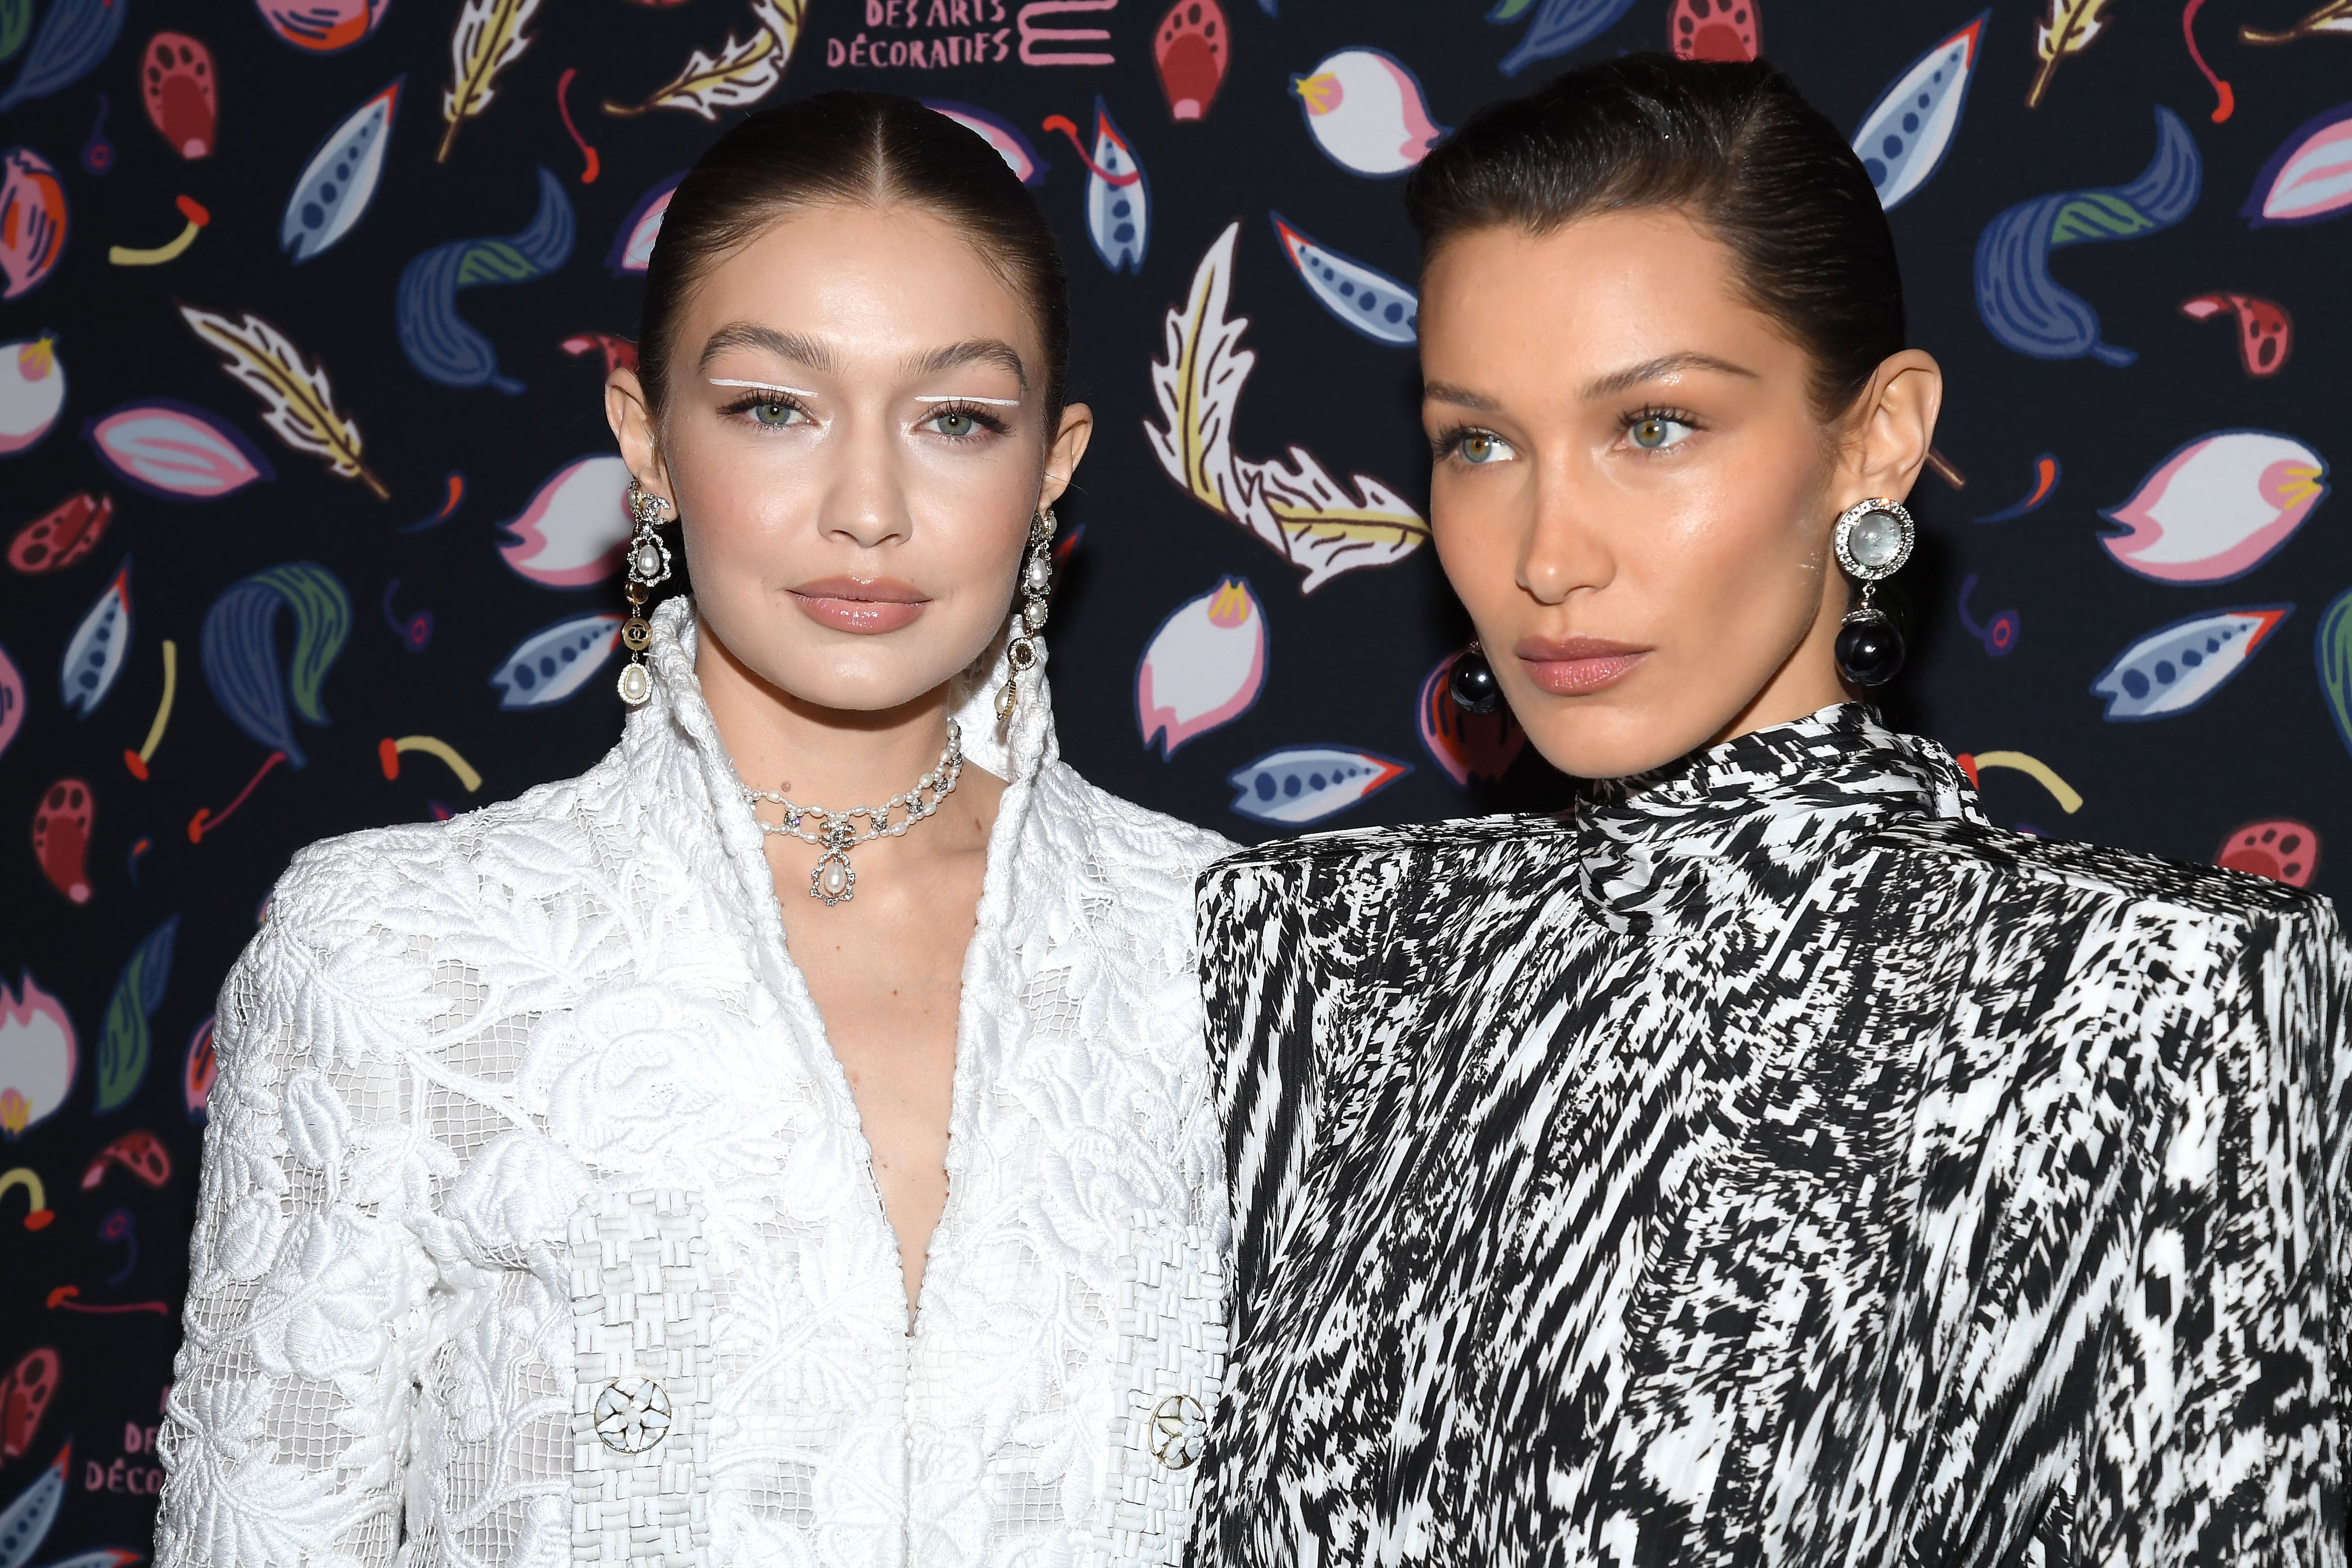 Bella Hadid Shares New Photos of Baby Khai on Her First Birthday